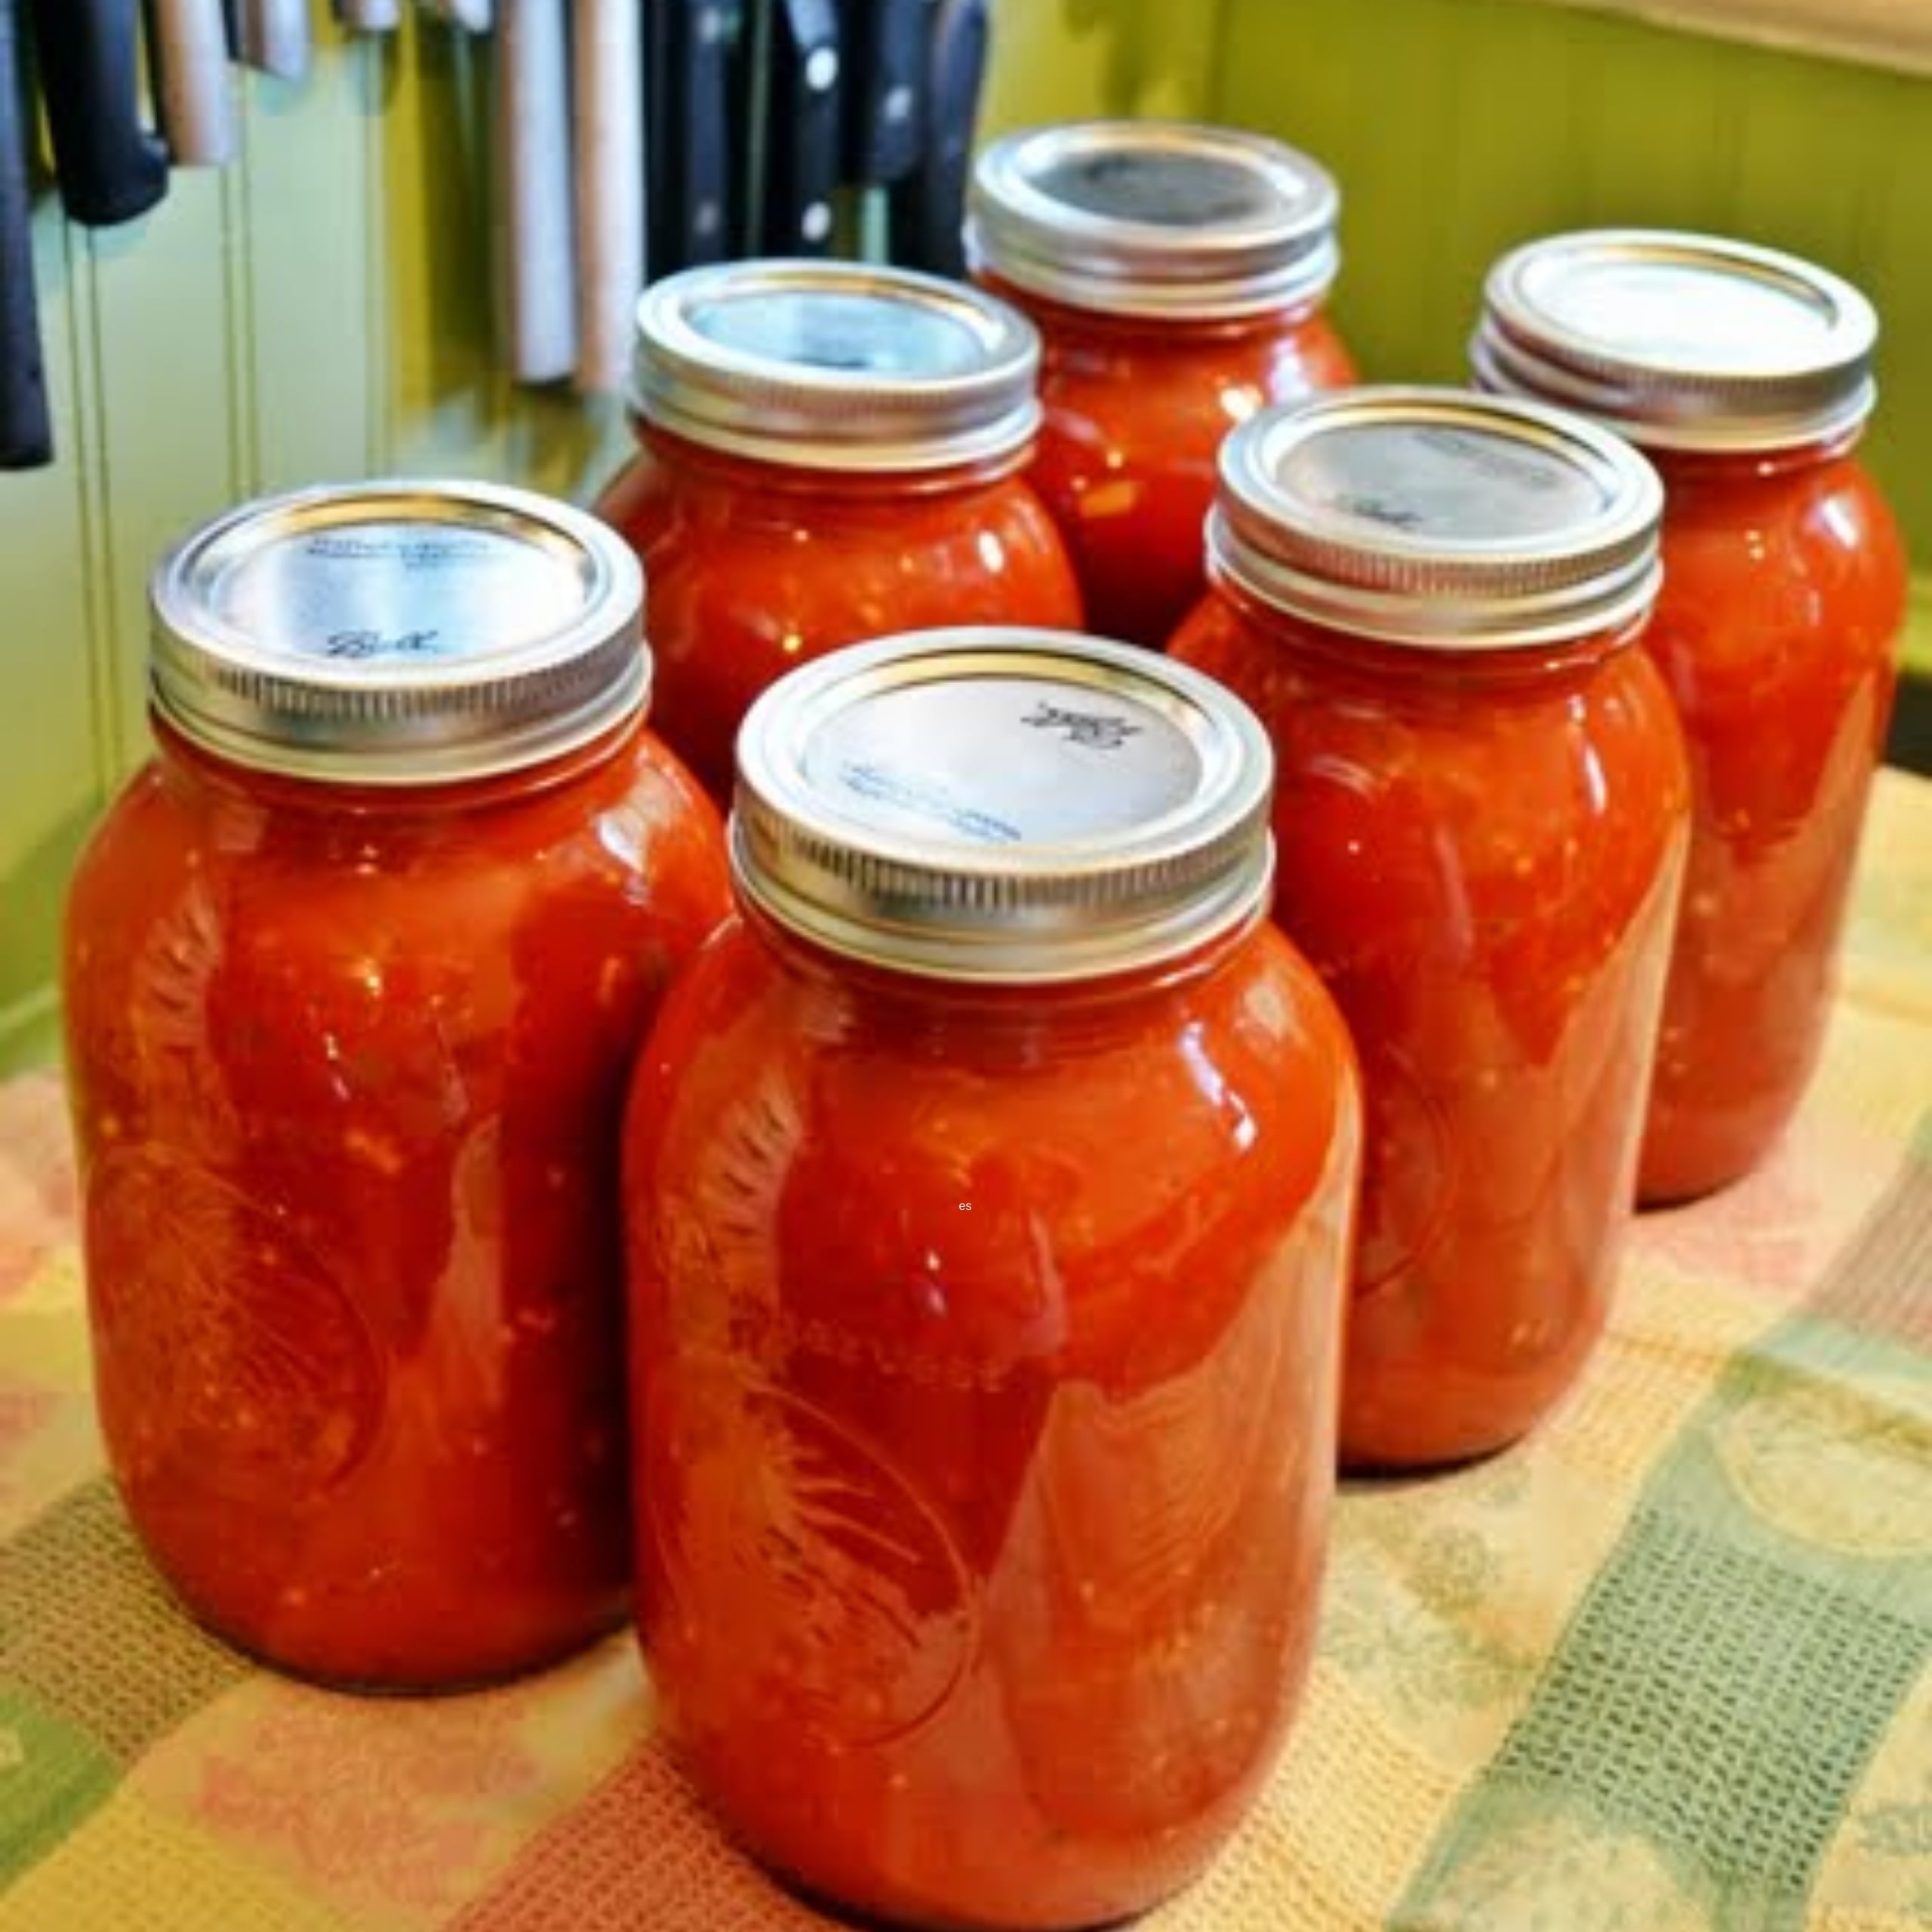 Re-using jars from store-bought products - Healthy Canning in Partnership  with Canning for beginners, safely by the book